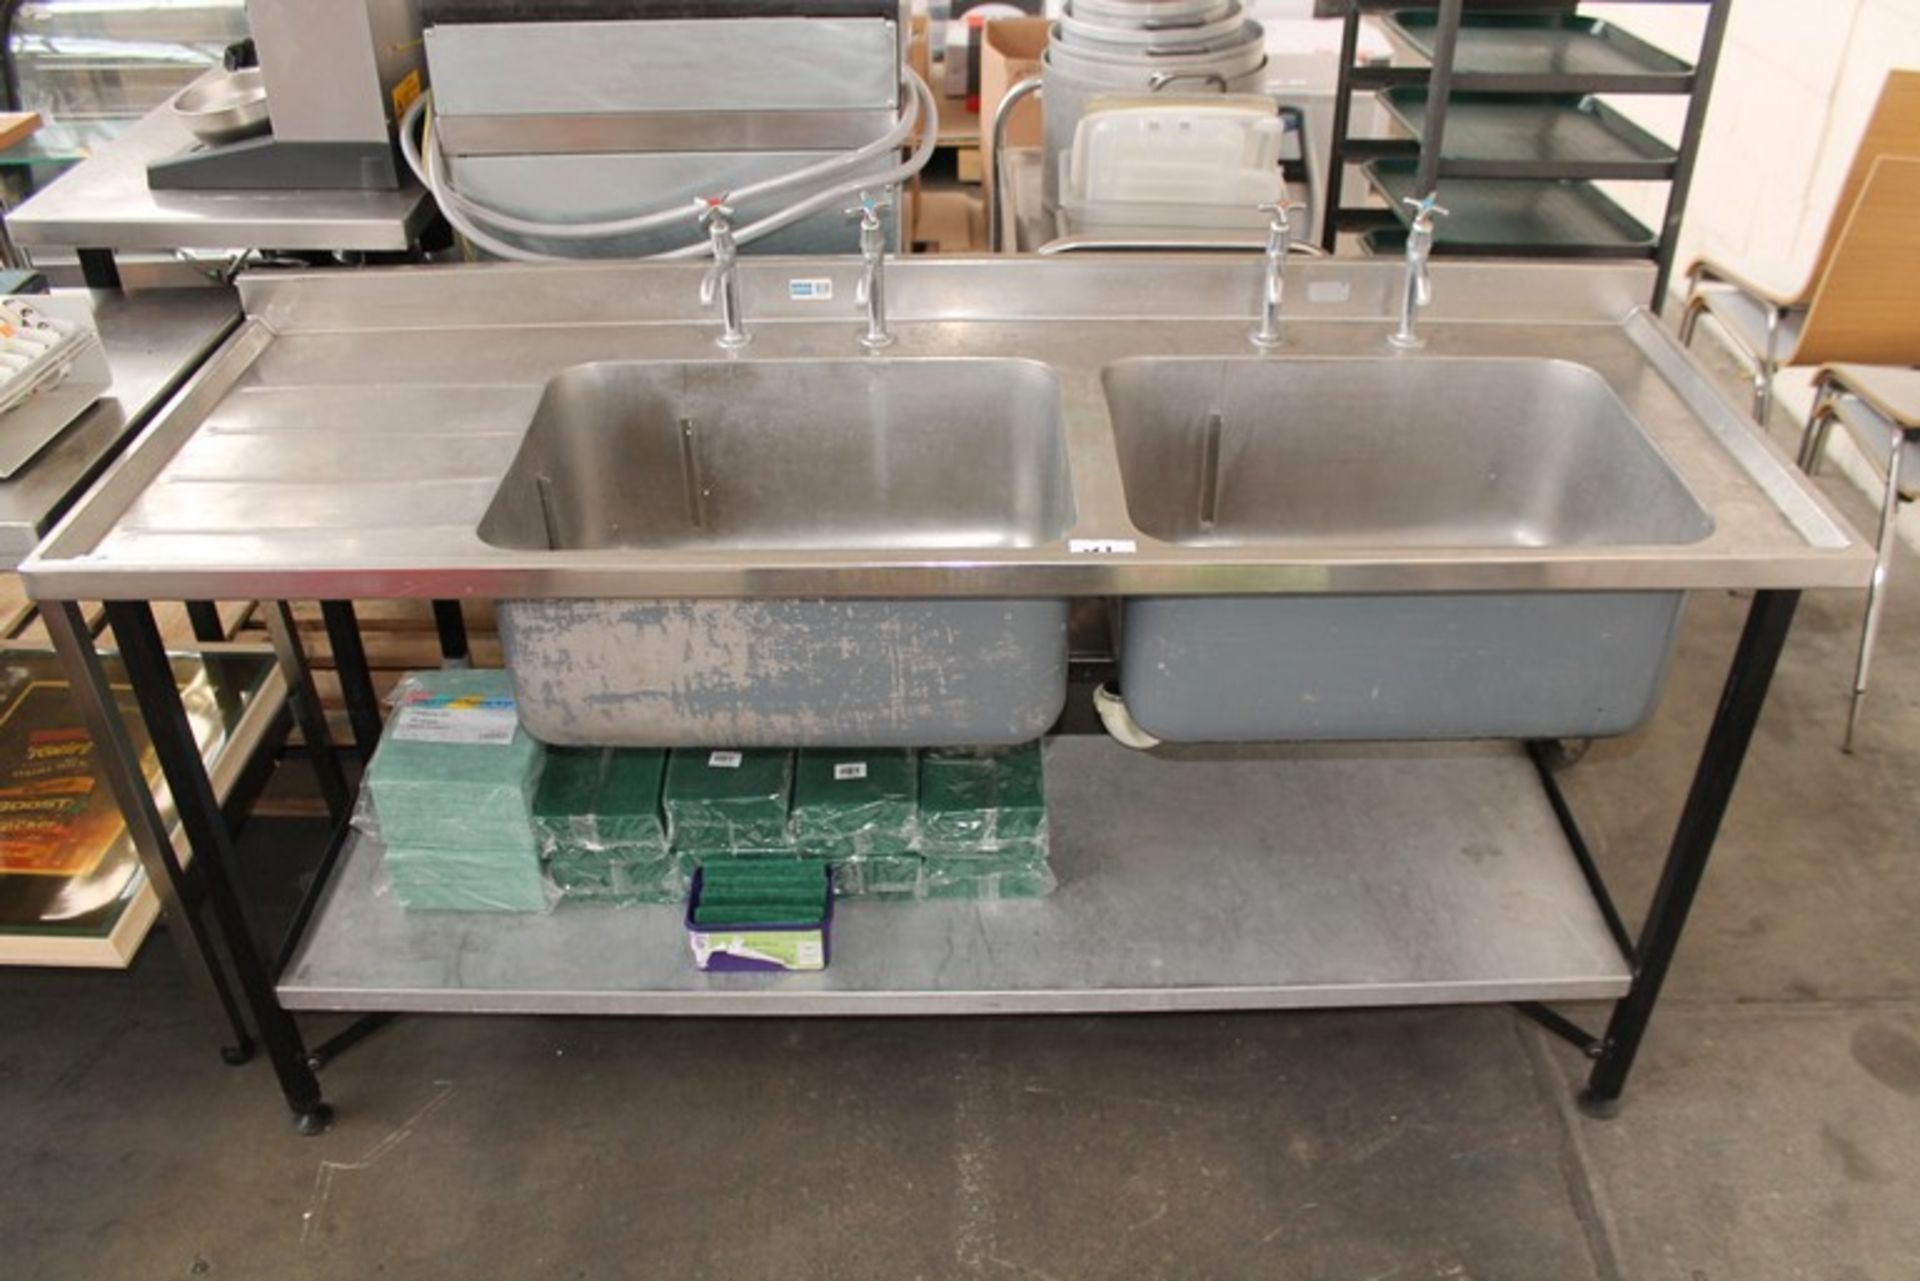 ONE BRUSHED STEEL DOUBLE INDUSTRIAL SINK (CATERING)